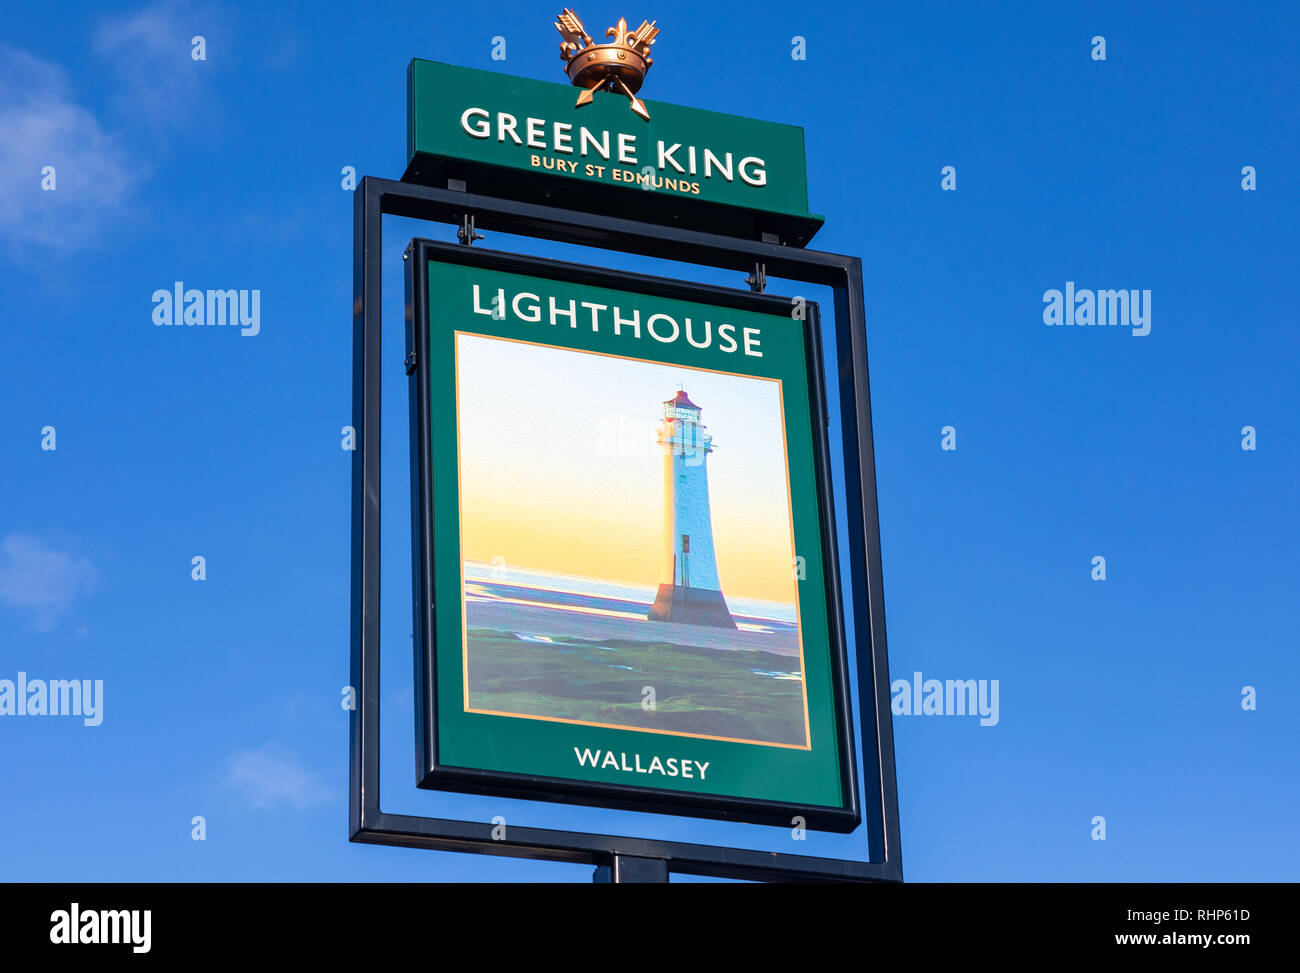 Exterior sign for The Lighthouse public house Wallasey Village part of the Greene King pub and restaurant chain Wallasey Village February 2019 Stock Photo